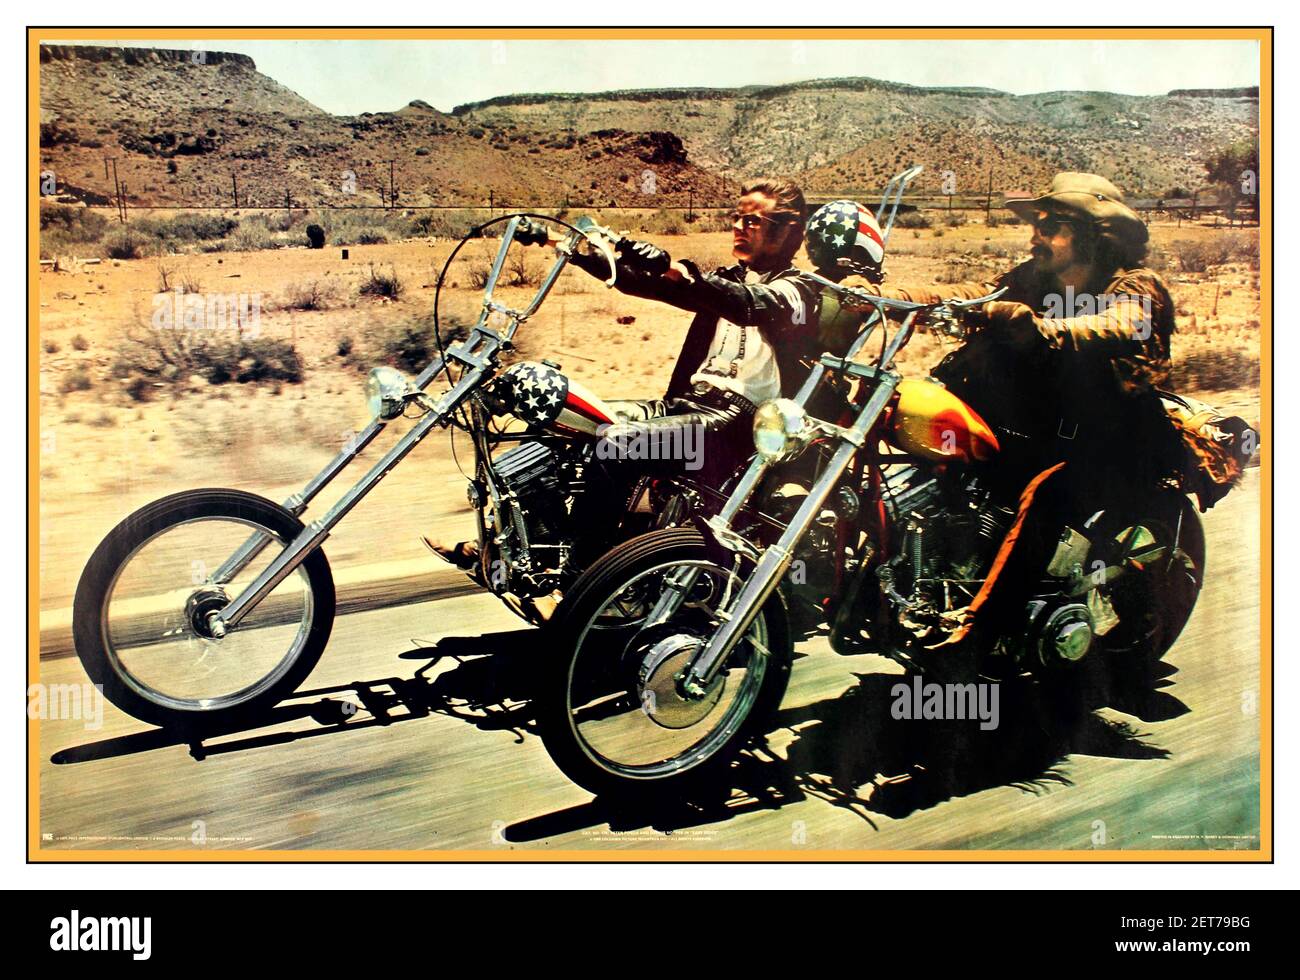 EASY RIDER 1960’s vintage film movie poster for Easy Rider Cinema film, the classic 1969 Dennis Hopper Cannes-Award-winning motorcycle biker drug melodrama. Written by Peter Fonda, Dennis Hopper, and Terry Southern', who were nominated for the Best Writing Academy Award) starring Peter Fonda, Dennis Hopper, Jack Nicholson (nominated for the Best Supporting Actor Academy Award for this film), Luana Anders, Antonio Mendoza, Luke Askew, Toni Basil, ©️ Columbia Pictures Stock Photo